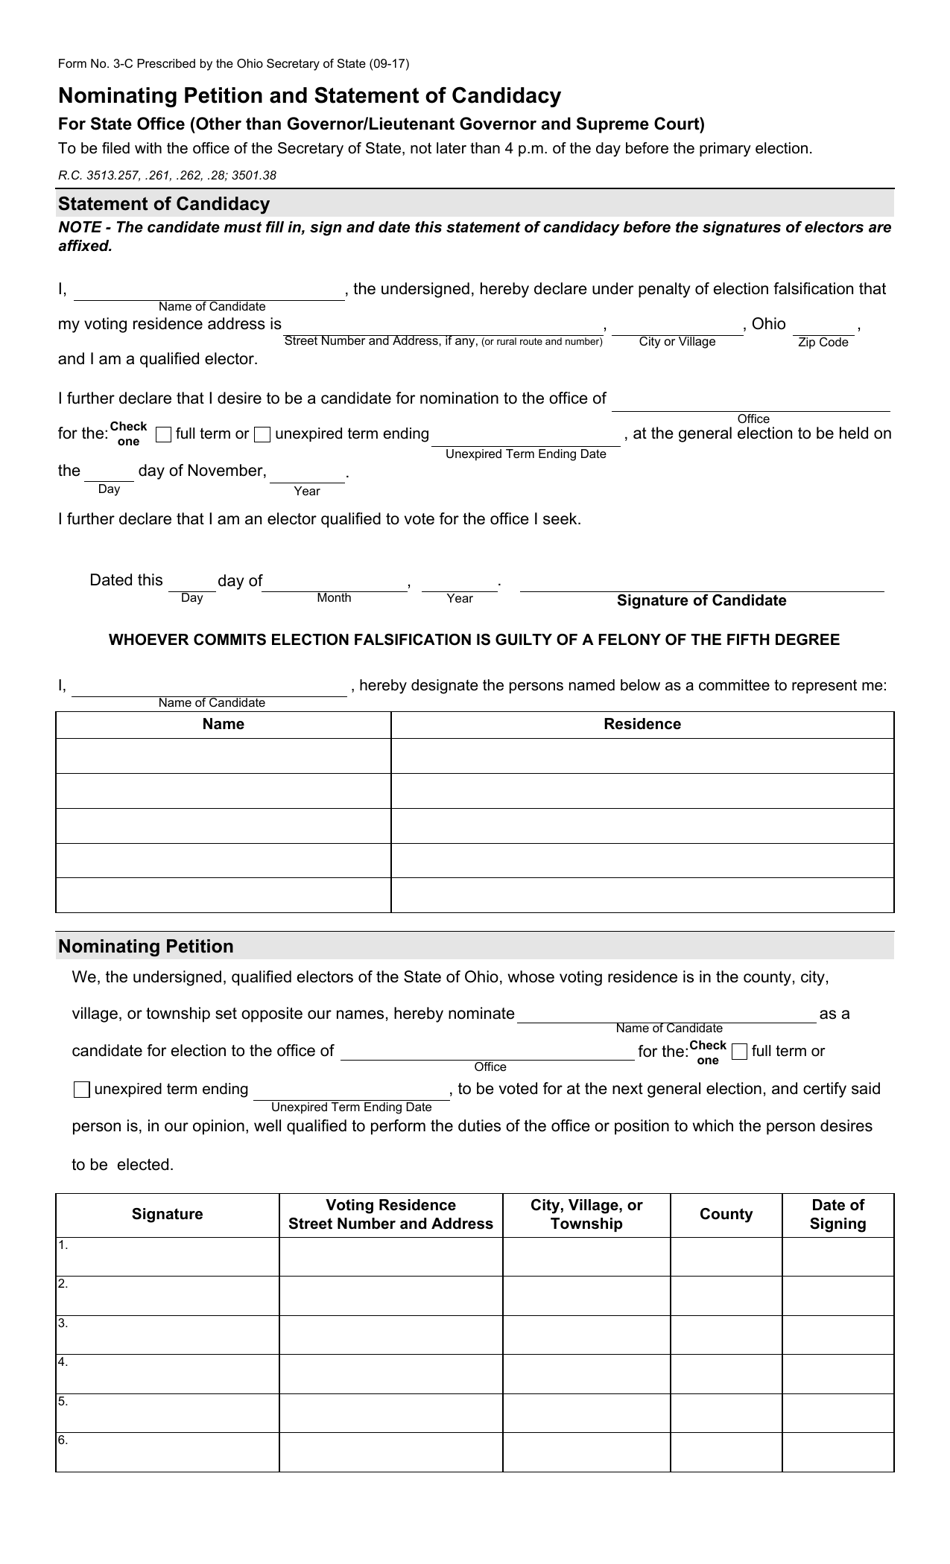 Form 3-C Nominating Petition and Statement of Candidacy for State Office (Other Than Governor / Lieutenant Governor and Supreme Court) - Ohio, Page 1